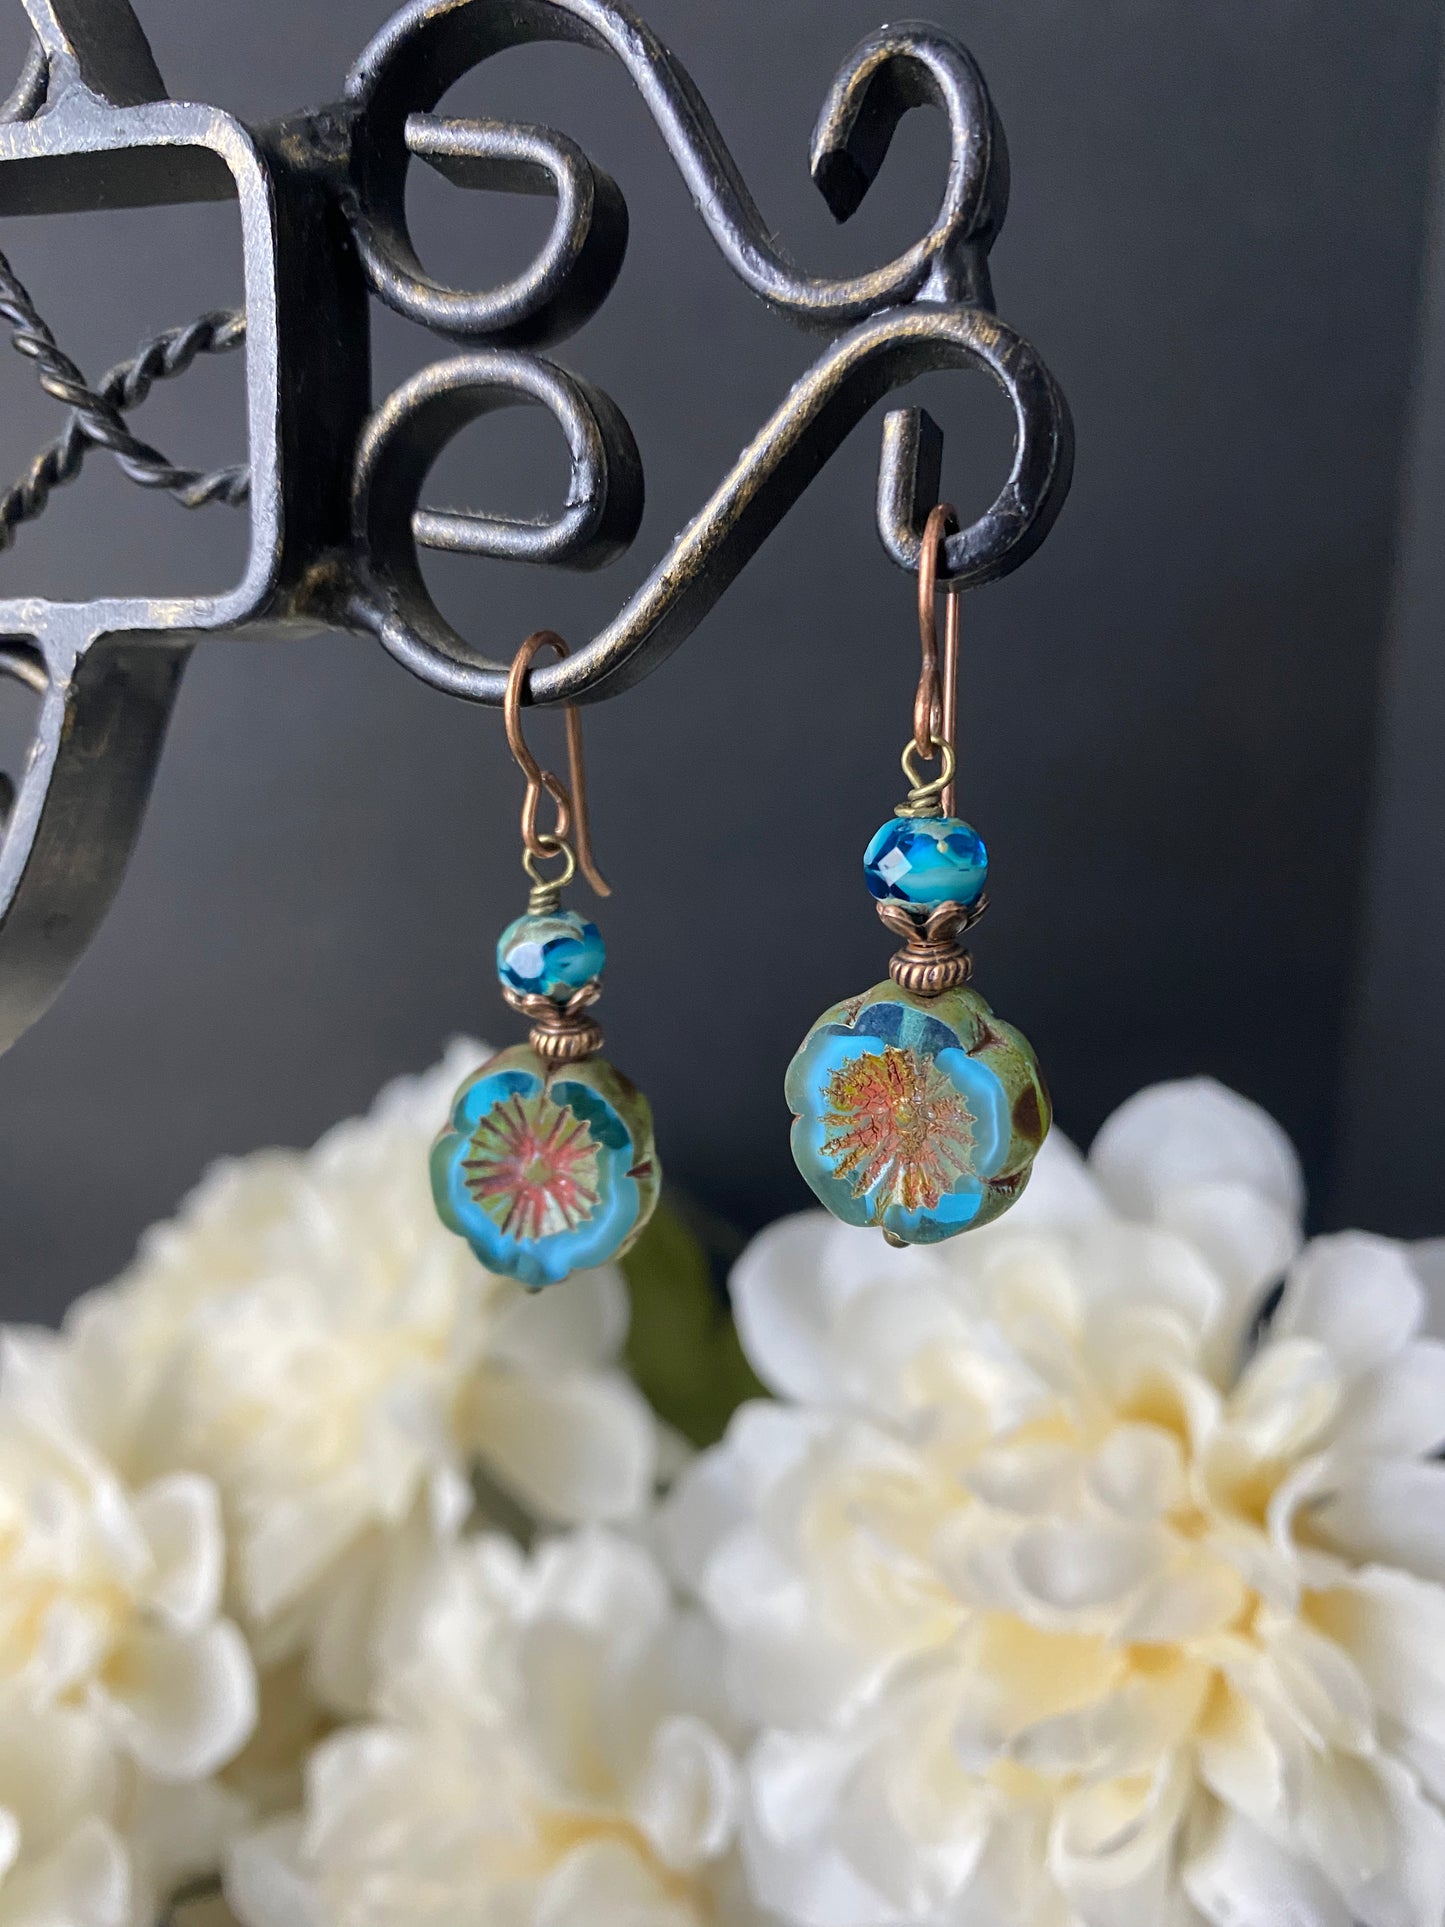 Blue Flower Czech glass, picssso glass, small earrings, and copper metal earrings. - Andria Bieber Designs 